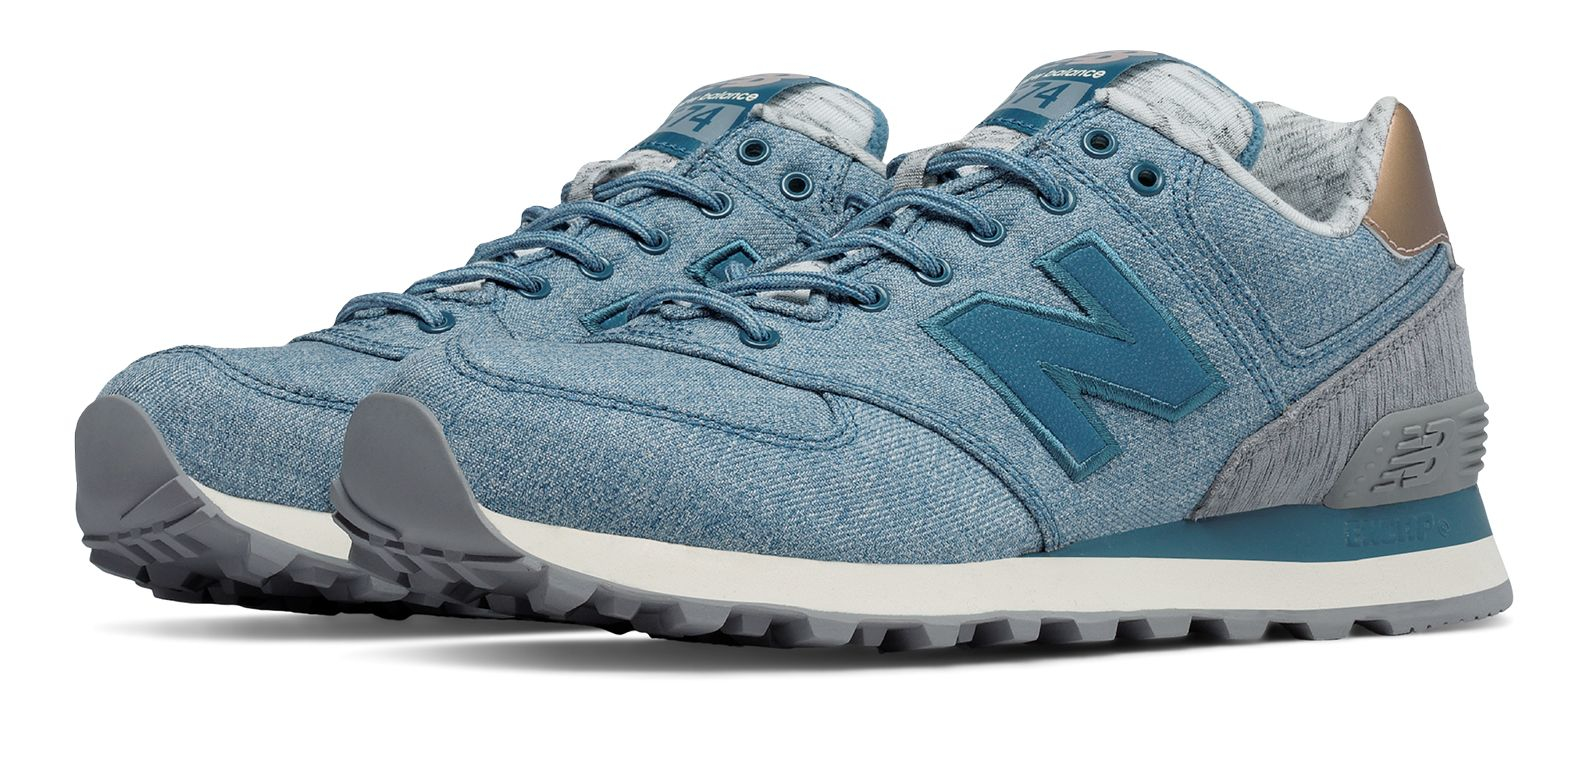 teal and rose gold new balance